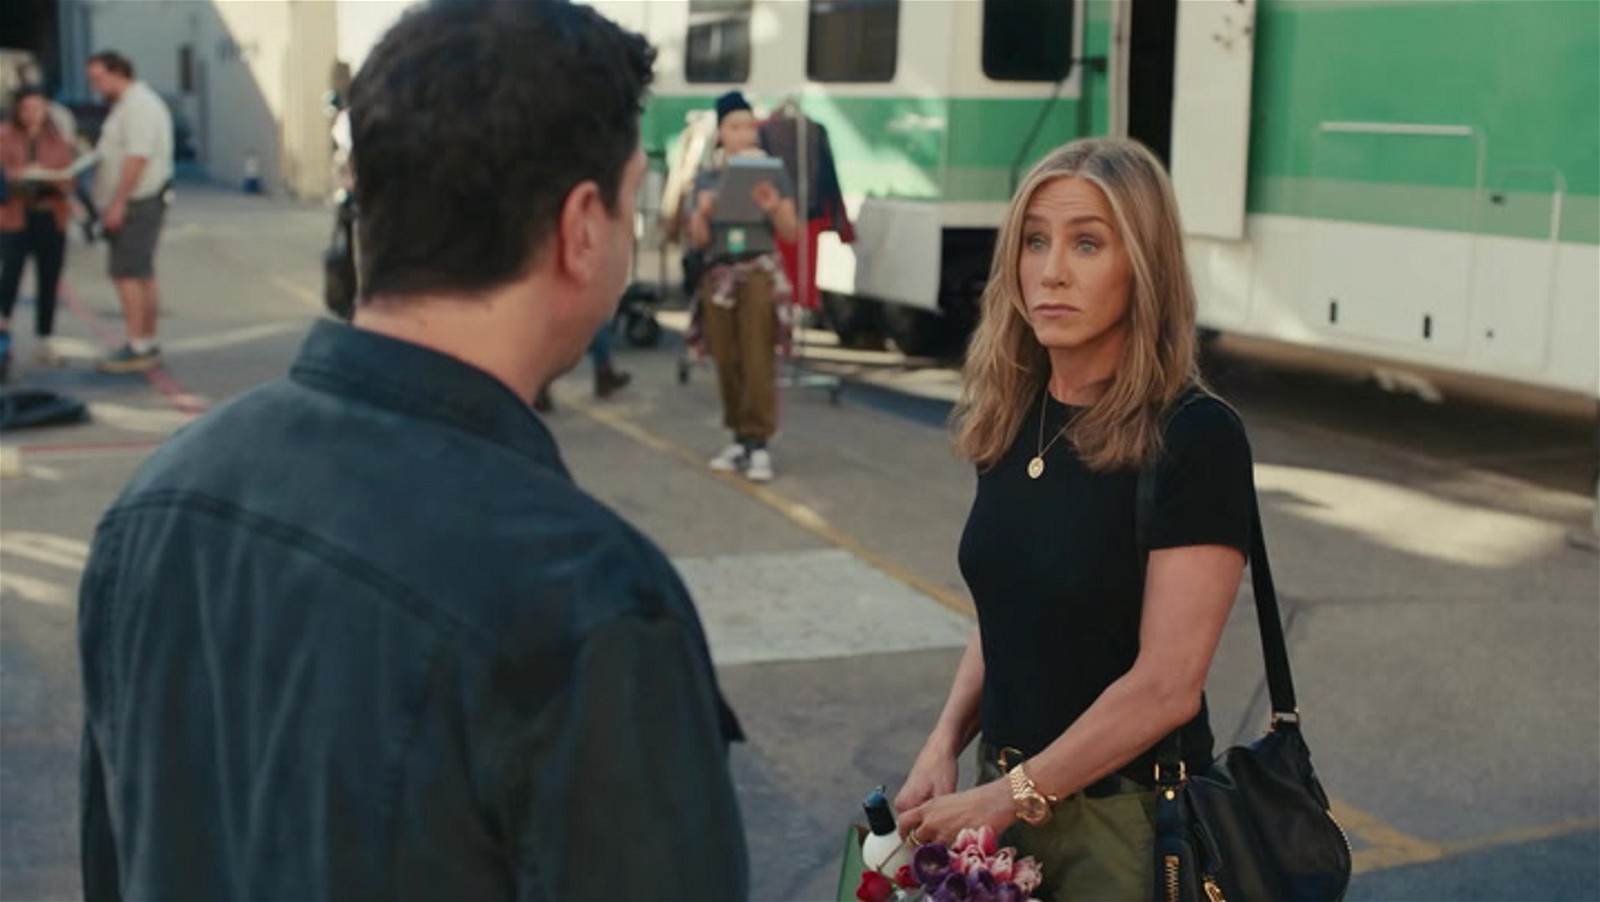 David Schwimmer and Jennifer Aniston in UberEats Ad